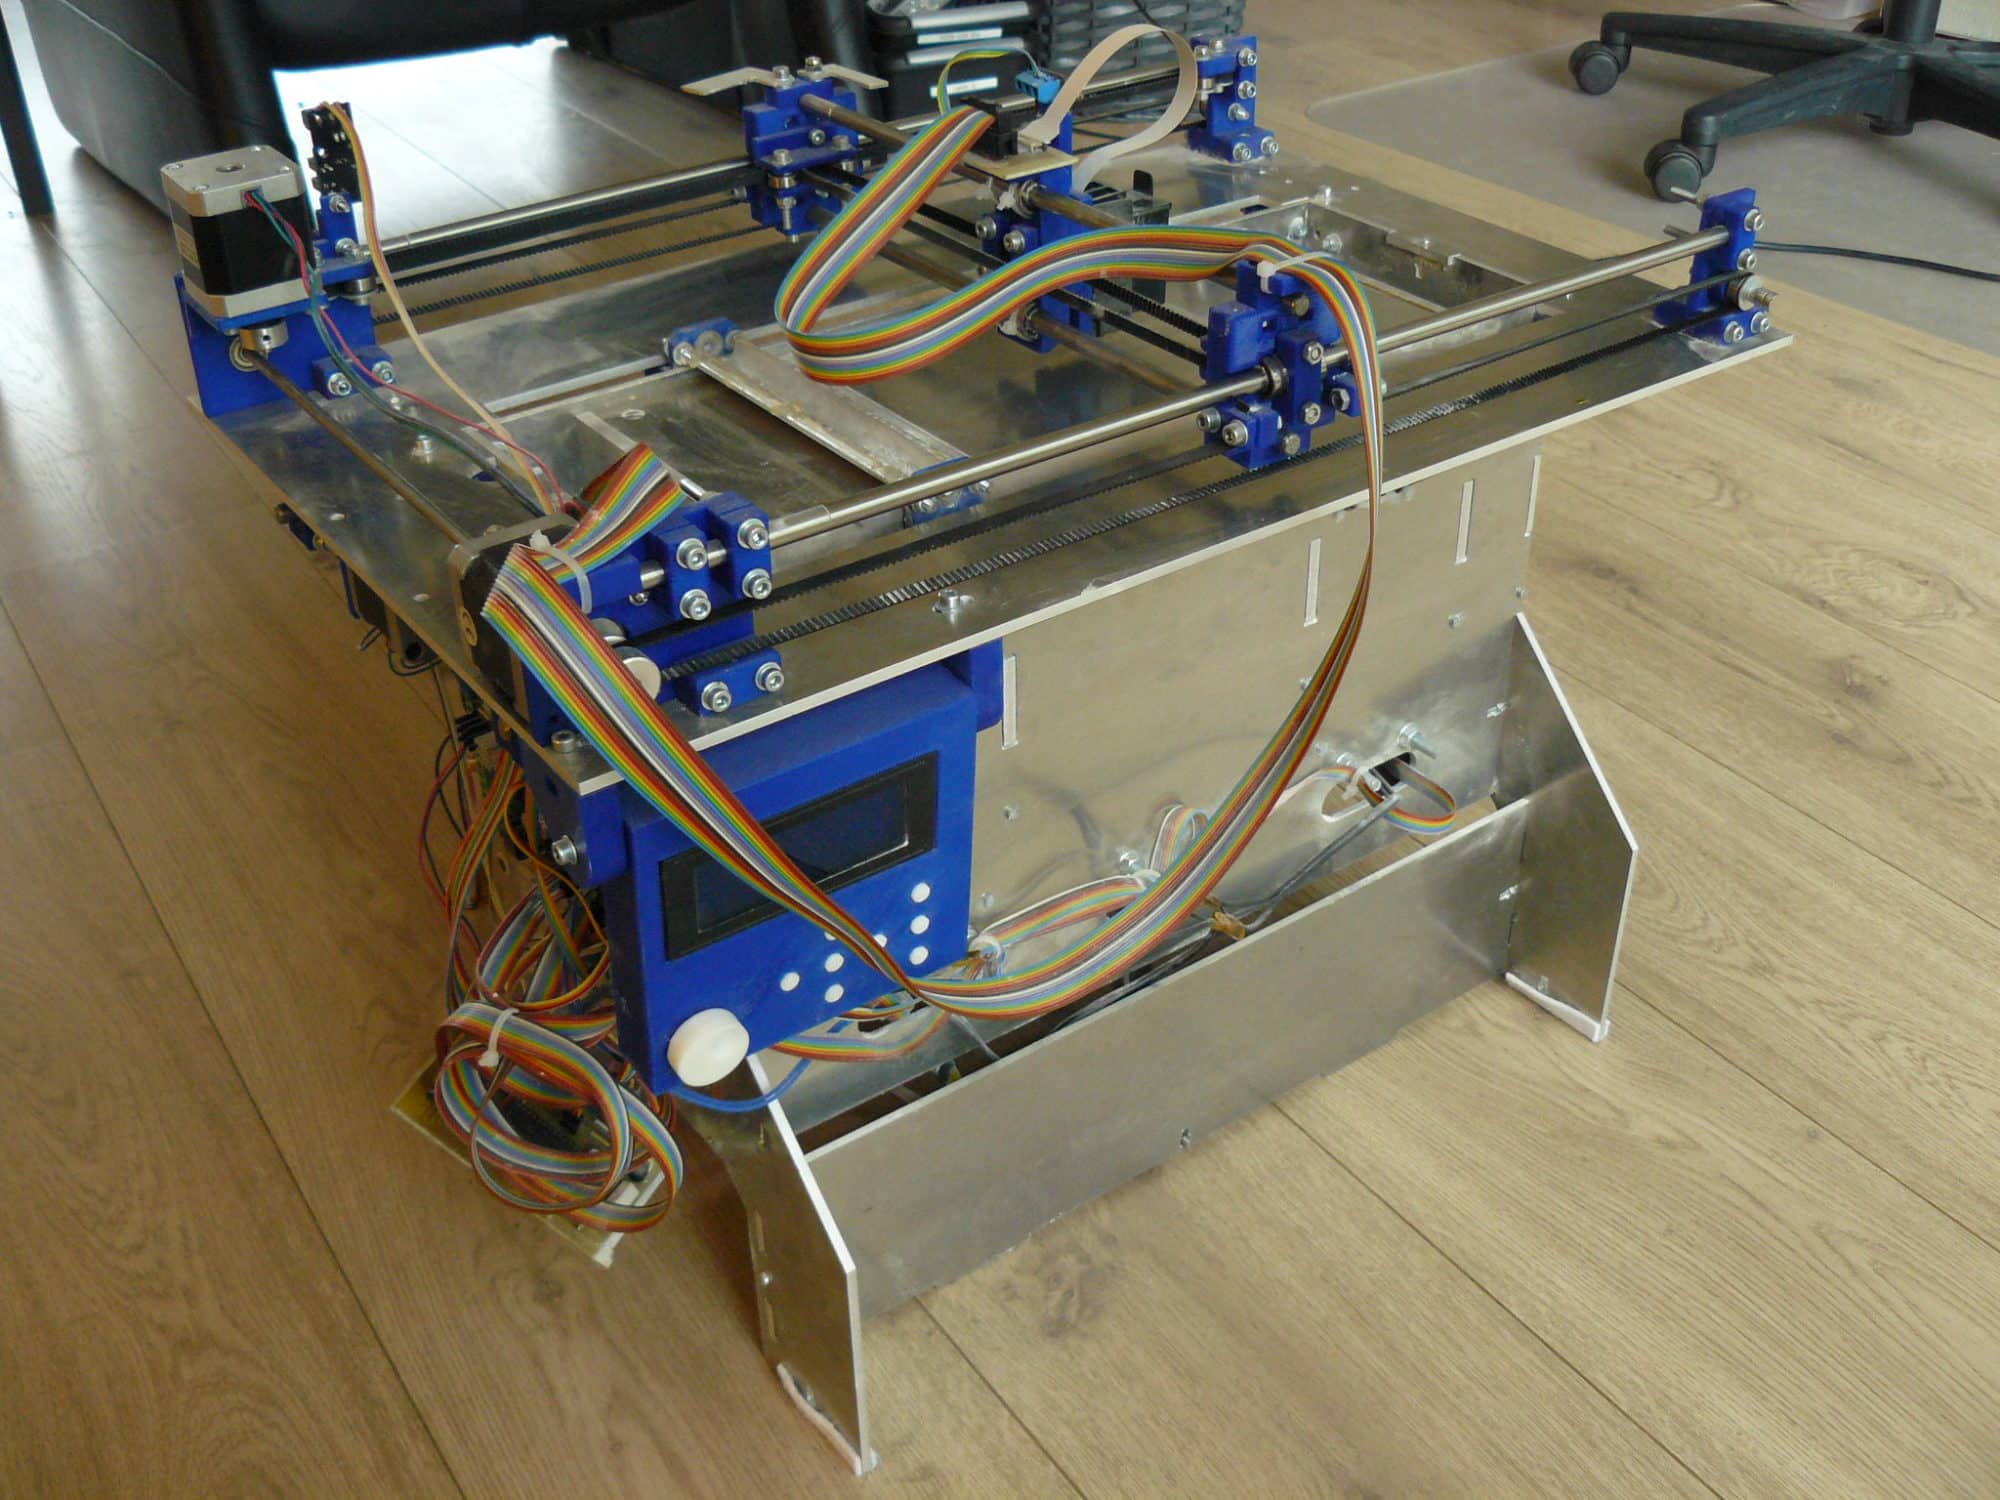 You are currently viewing Plan B: An Open Source 3D Printer That Creates Detailed 3D Models Using Old Printer Parts